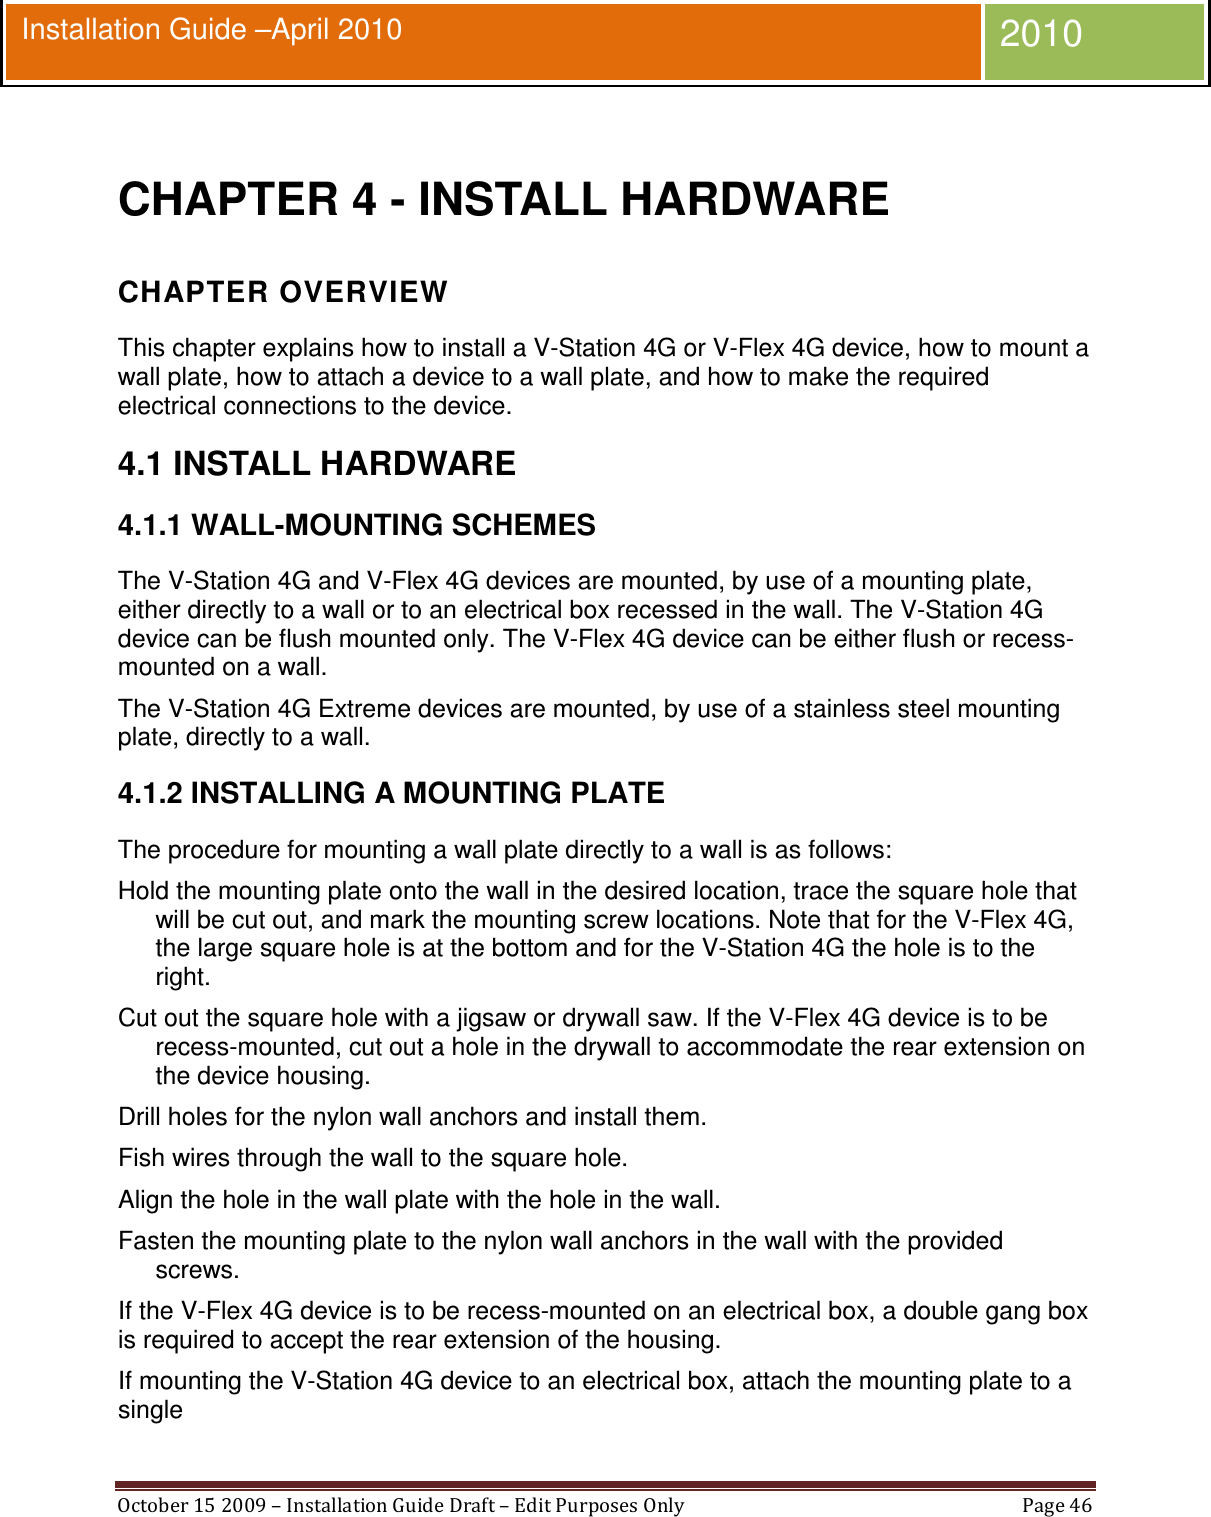  October 15 2009 – Installation Guide Draft – Edit Purposes Only  Page 46  Installation Guide –April 2010 2010  CHAPTER 4 - INSTALL HARDWARE CHAPTER OVERVIEW This chapter explains how to install a V-Station 4G or V-Flex 4G device, how to mount a wall plate, how to attach a device to a wall plate, and how to make the required electrical connections to the device. 4.1 INSTALL HARDWARE 4.1.1 WALL-MOUNTING SCHEMES The V-Station 4G and V-Flex 4G devices are mounted, by use of a mounting plate, either directly to a wall or to an electrical box recessed in the wall. The V-Station 4G device can be flush mounted only. The V-Flex 4G device can be either flush or recess-mounted on a wall. The V-Station 4G Extreme devices are mounted, by use of a stainless steel mounting plate, directly to a wall. 4.1.2 INSTALLING A MOUNTING PLATE The procedure for mounting a wall plate directly to a wall is as follows: Hold the mounting plate onto the wall in the desired location, trace the square hole that will be cut out, and mark the mounting screw locations. Note that for the V-Flex 4G, the large square hole is at the bottom and for the V-Station 4G the hole is to the right. Cut out the square hole with a jigsaw or drywall saw. If the V-Flex 4G device is to be recess-mounted, cut out a hole in the drywall to accommodate the rear extension on the device housing. Drill holes for the nylon wall anchors and install them. Fish wires through the wall to the square hole. Align the hole in the wall plate with the hole in the wall. Fasten the mounting plate to the nylon wall anchors in the wall with the provided screws. If the V-Flex 4G device is to be recess-mounted on an electrical box, a double gang box is required to accept the rear extension of the housing. If mounting the V-Station 4G device to an electrical box, attach the mounting plate to a single 